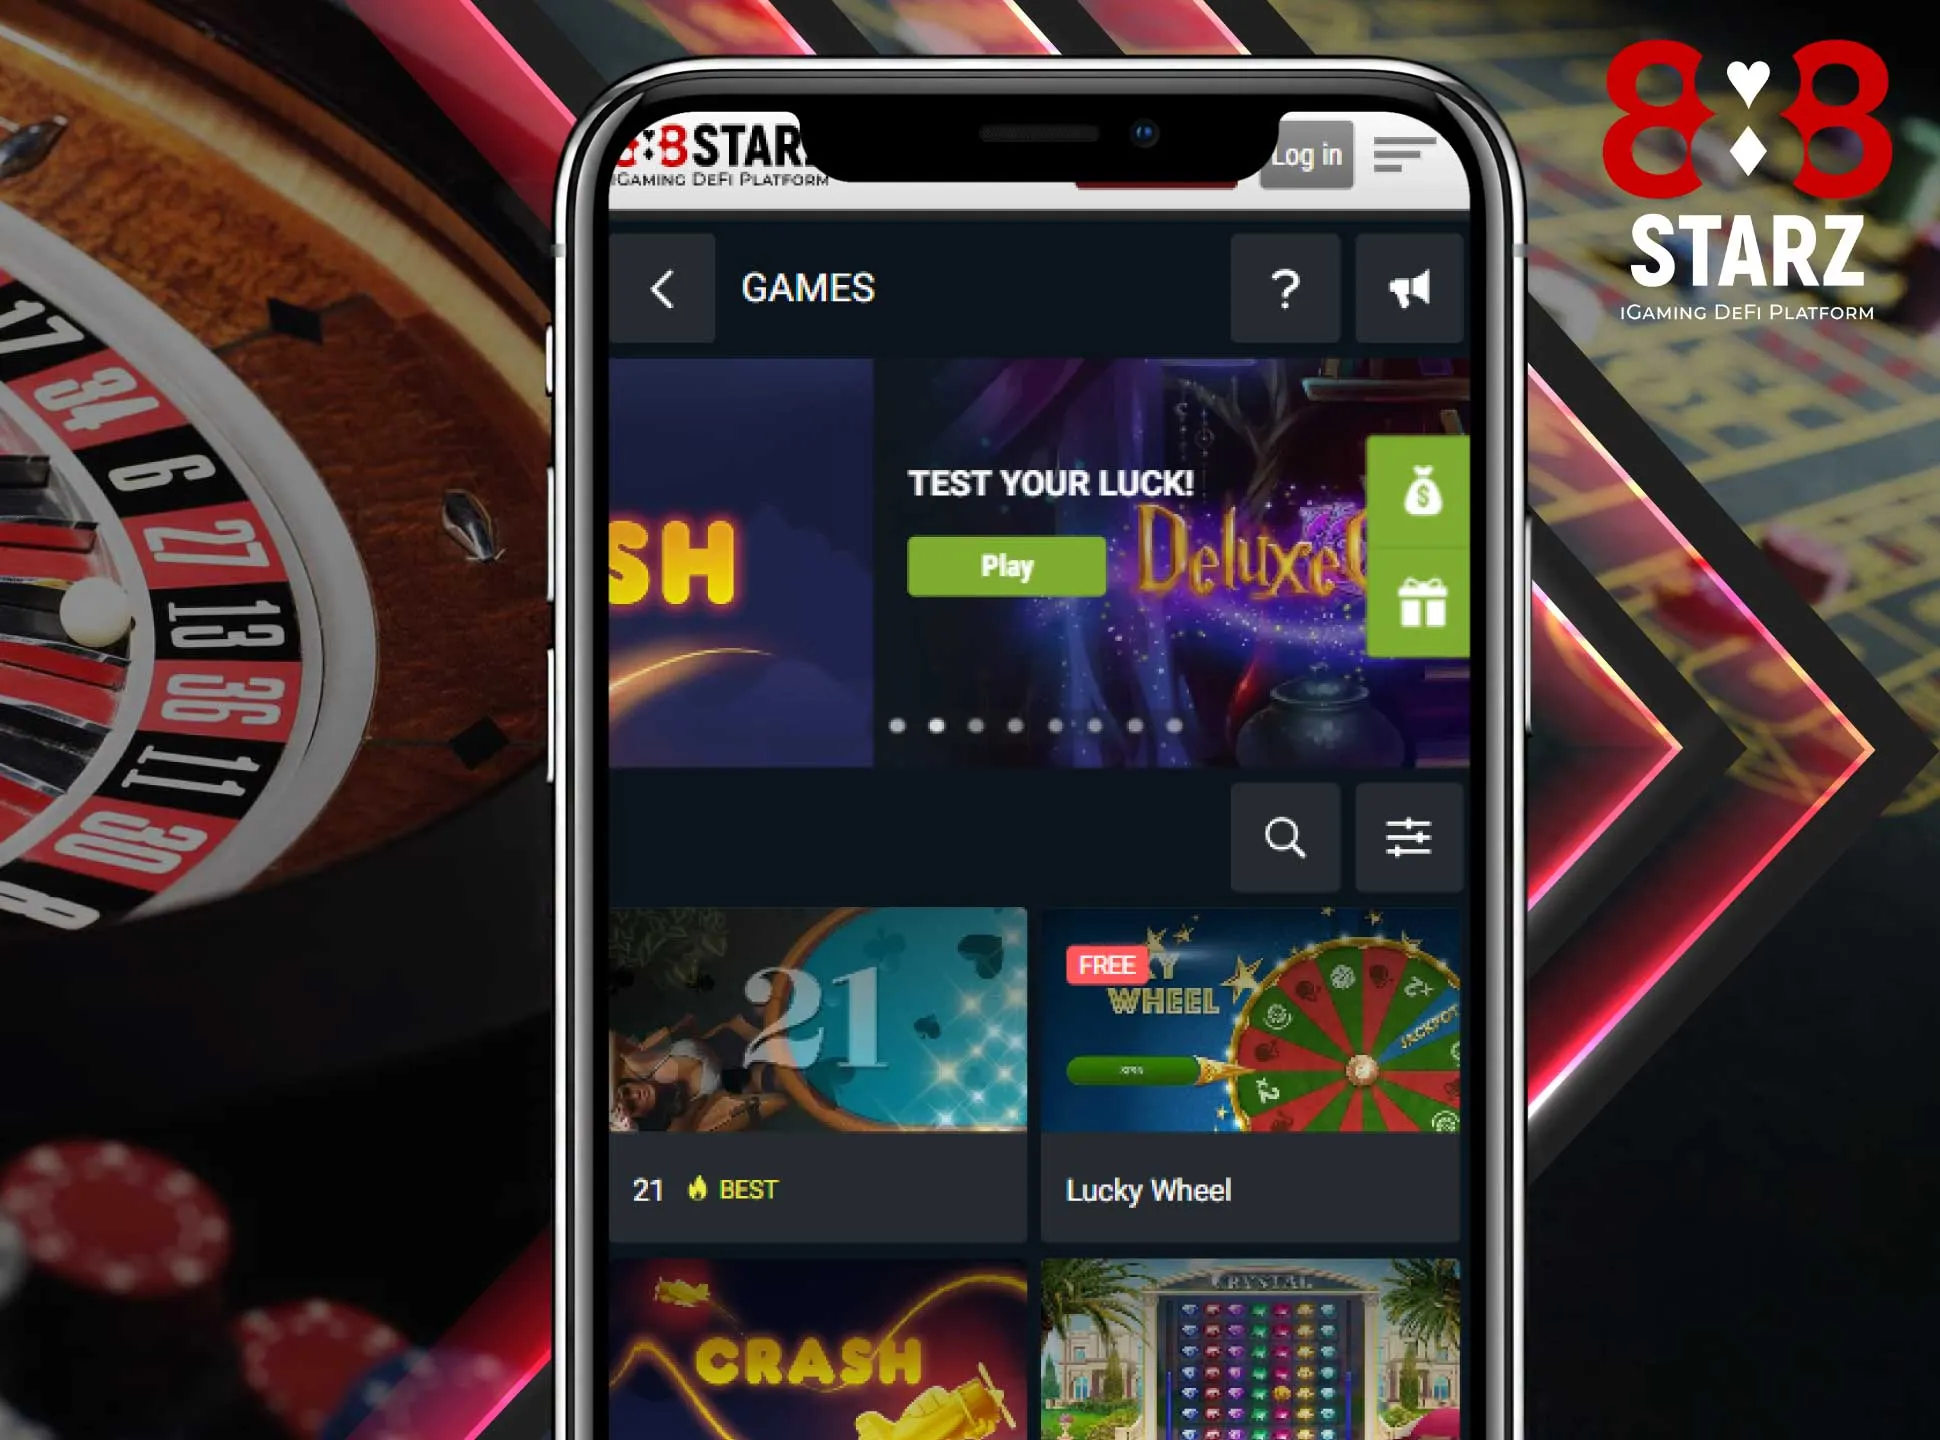 You can easily find these casino games in the 888starz mobile app.